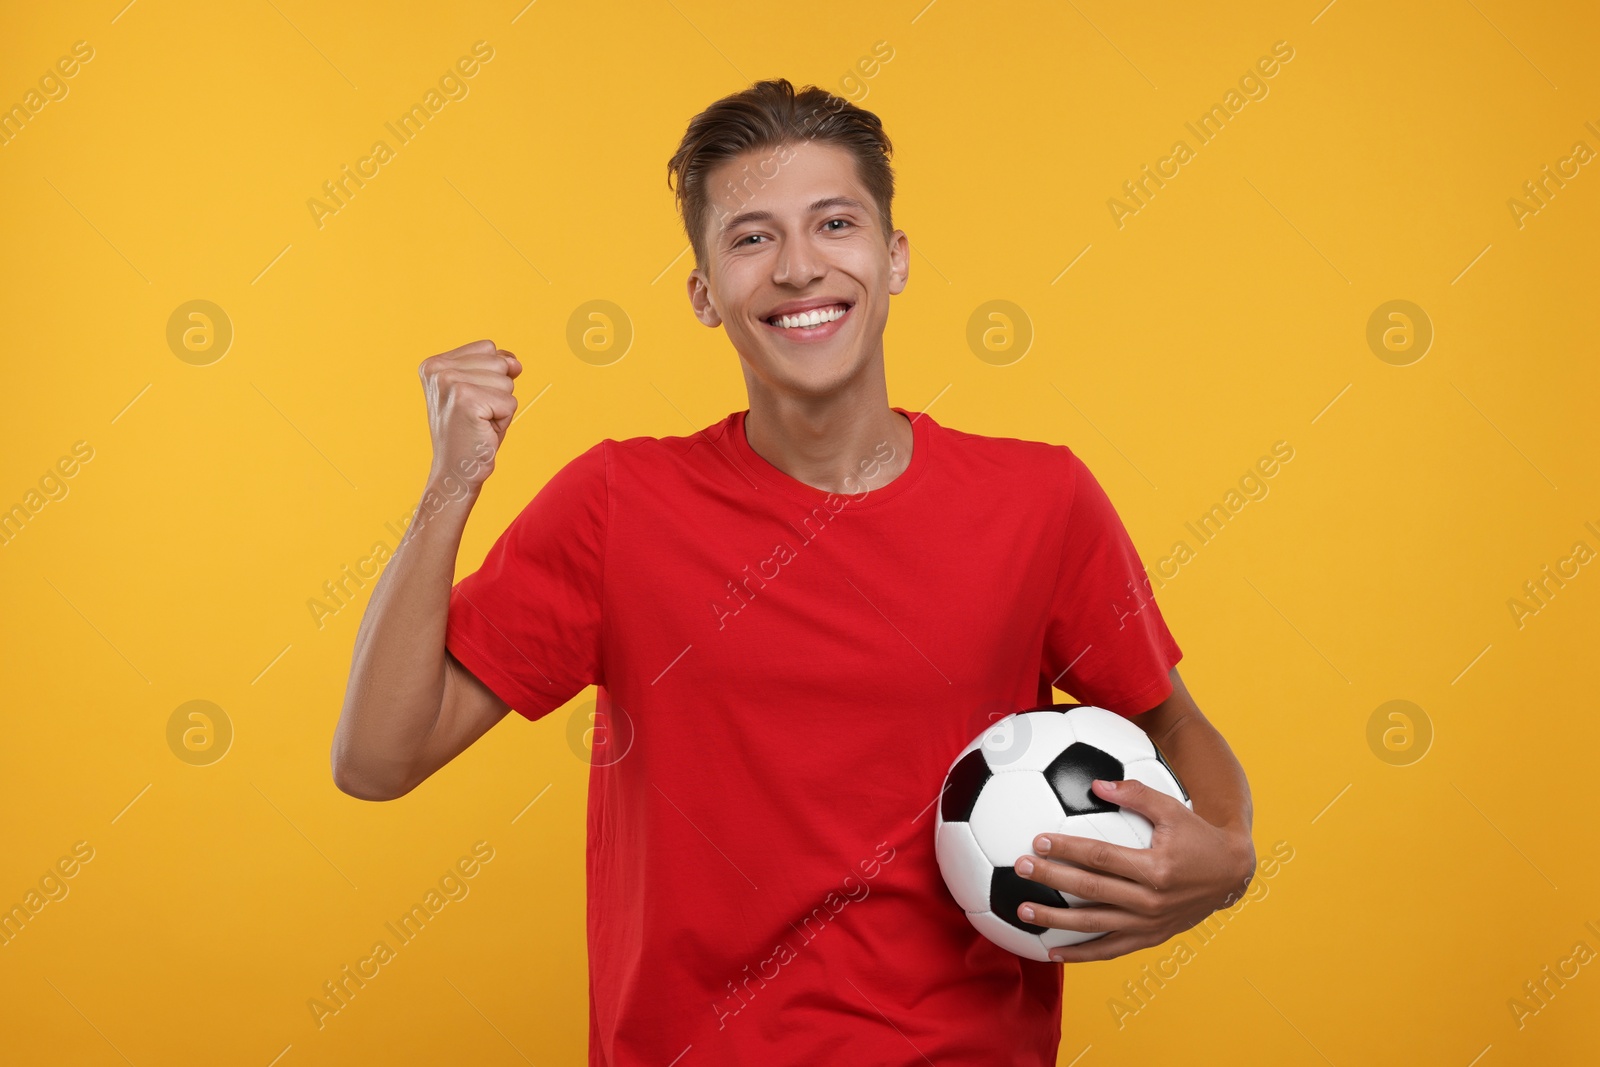 Photo of Happy sports fan with soccer ball celebrating on orange background